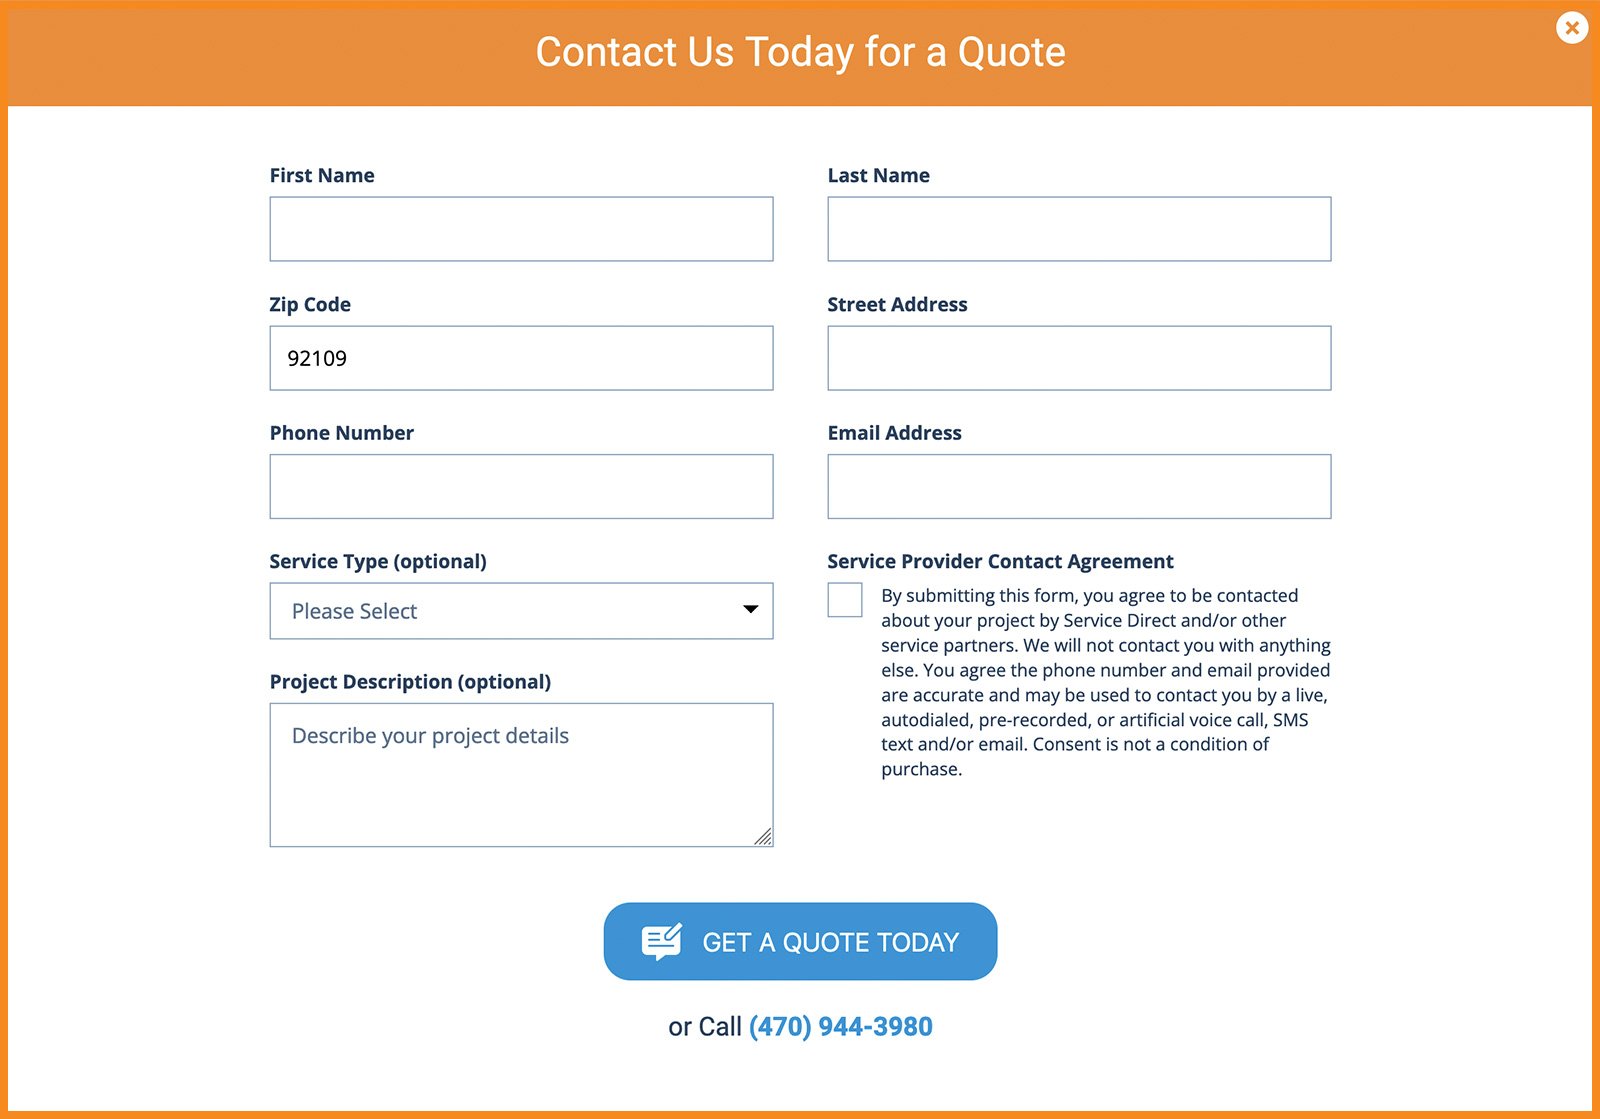 Form Lead Generation for Home Service providers example